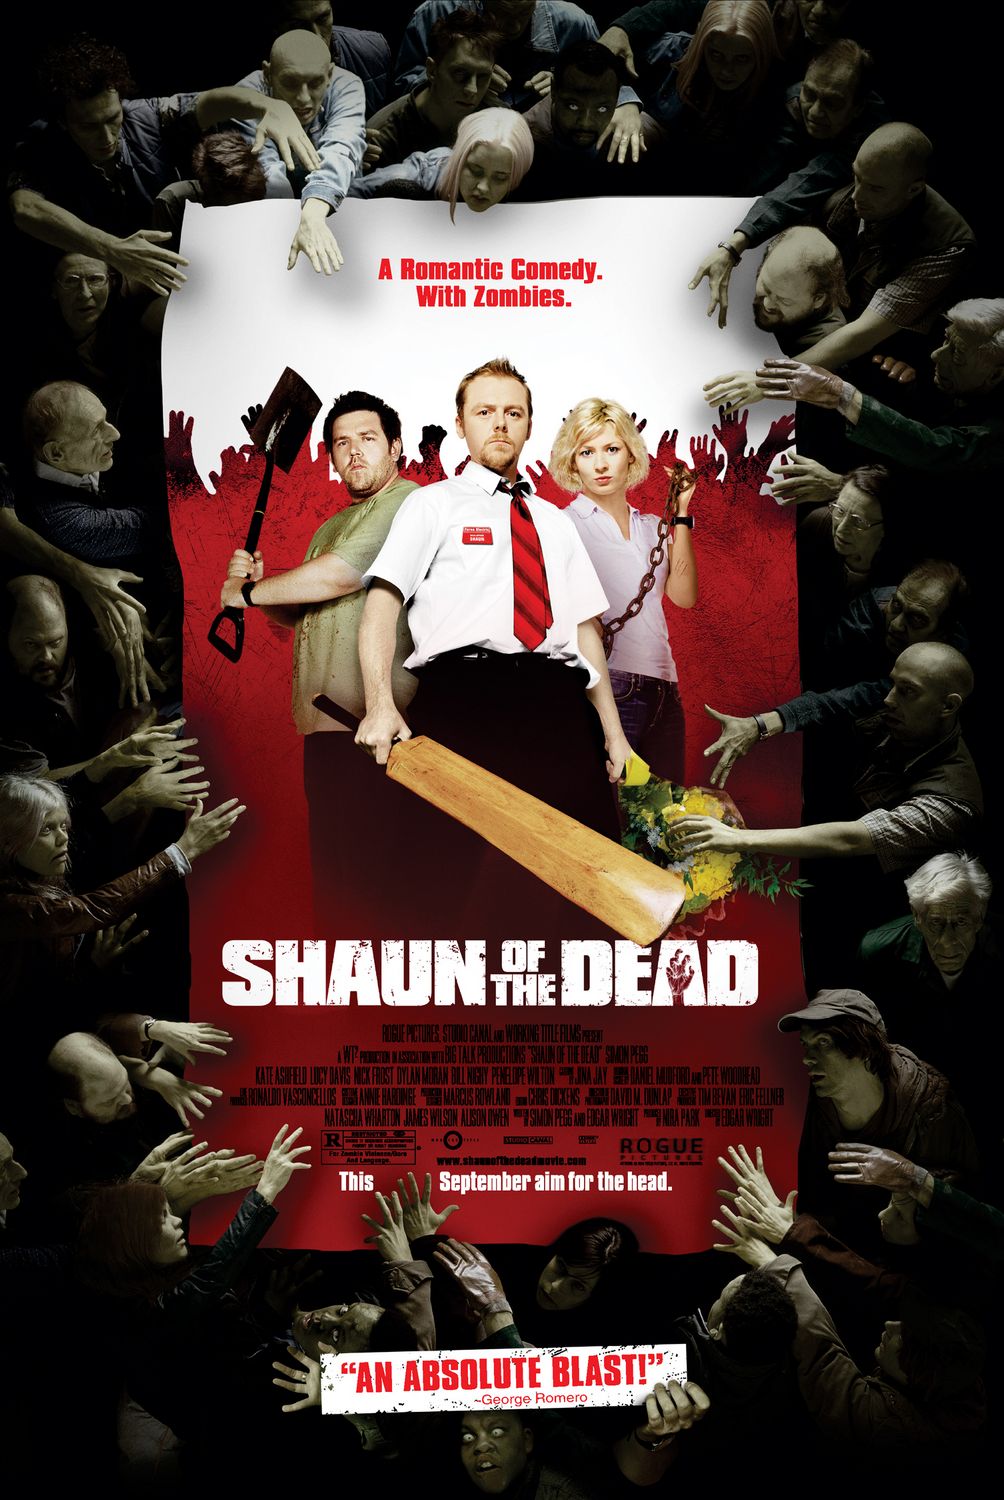 brittney king recommends free shaun of the dead movie pic